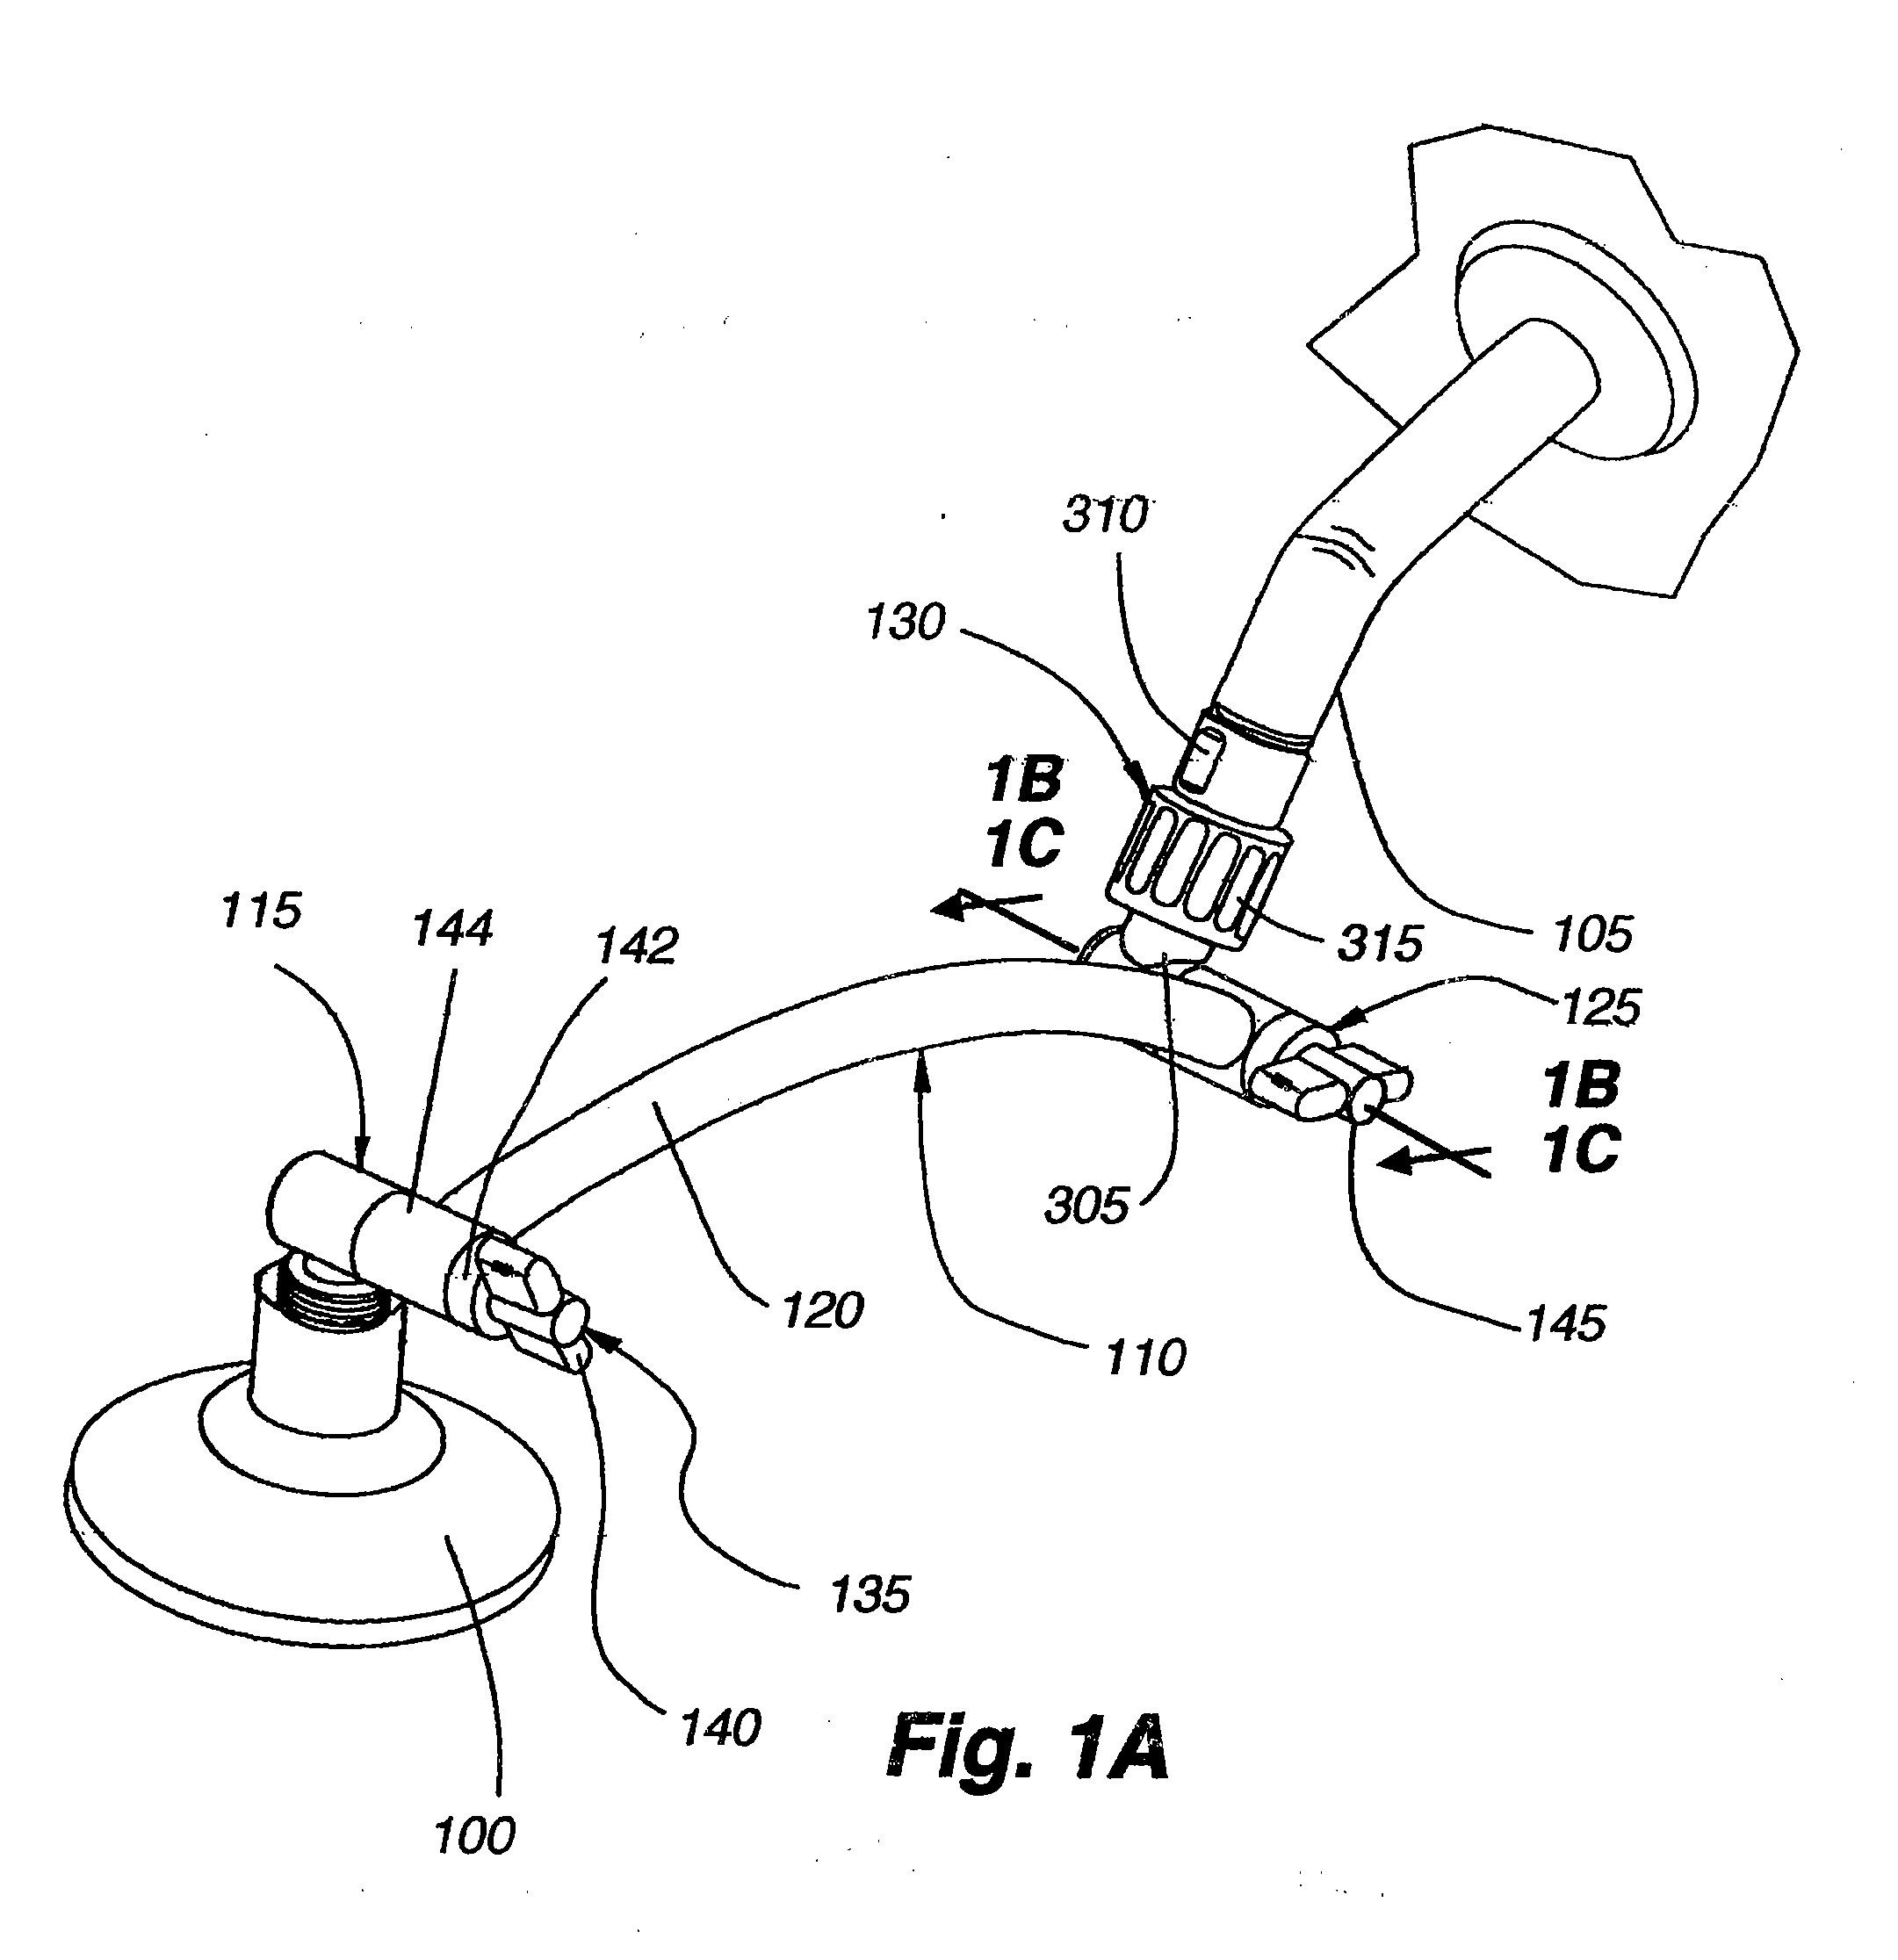 Showerhead attachment assembly